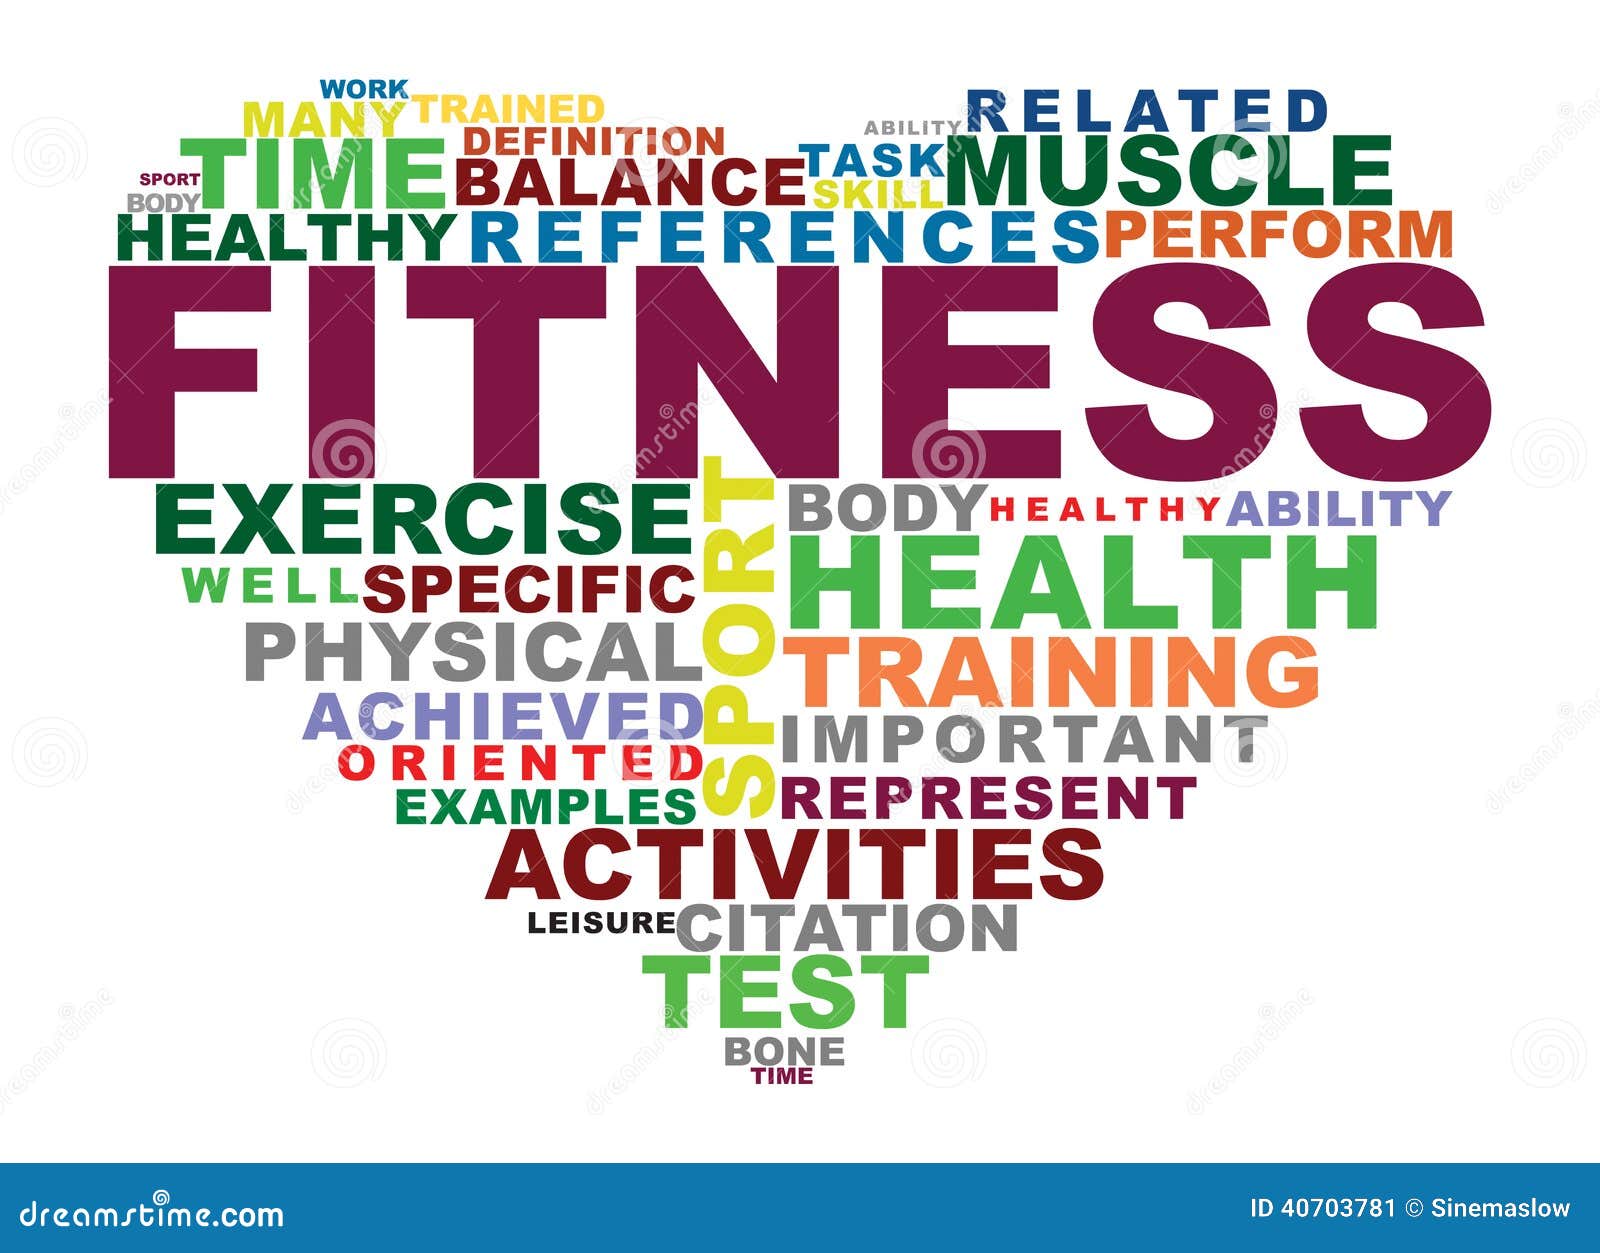 health and fitness clipart - photo #9